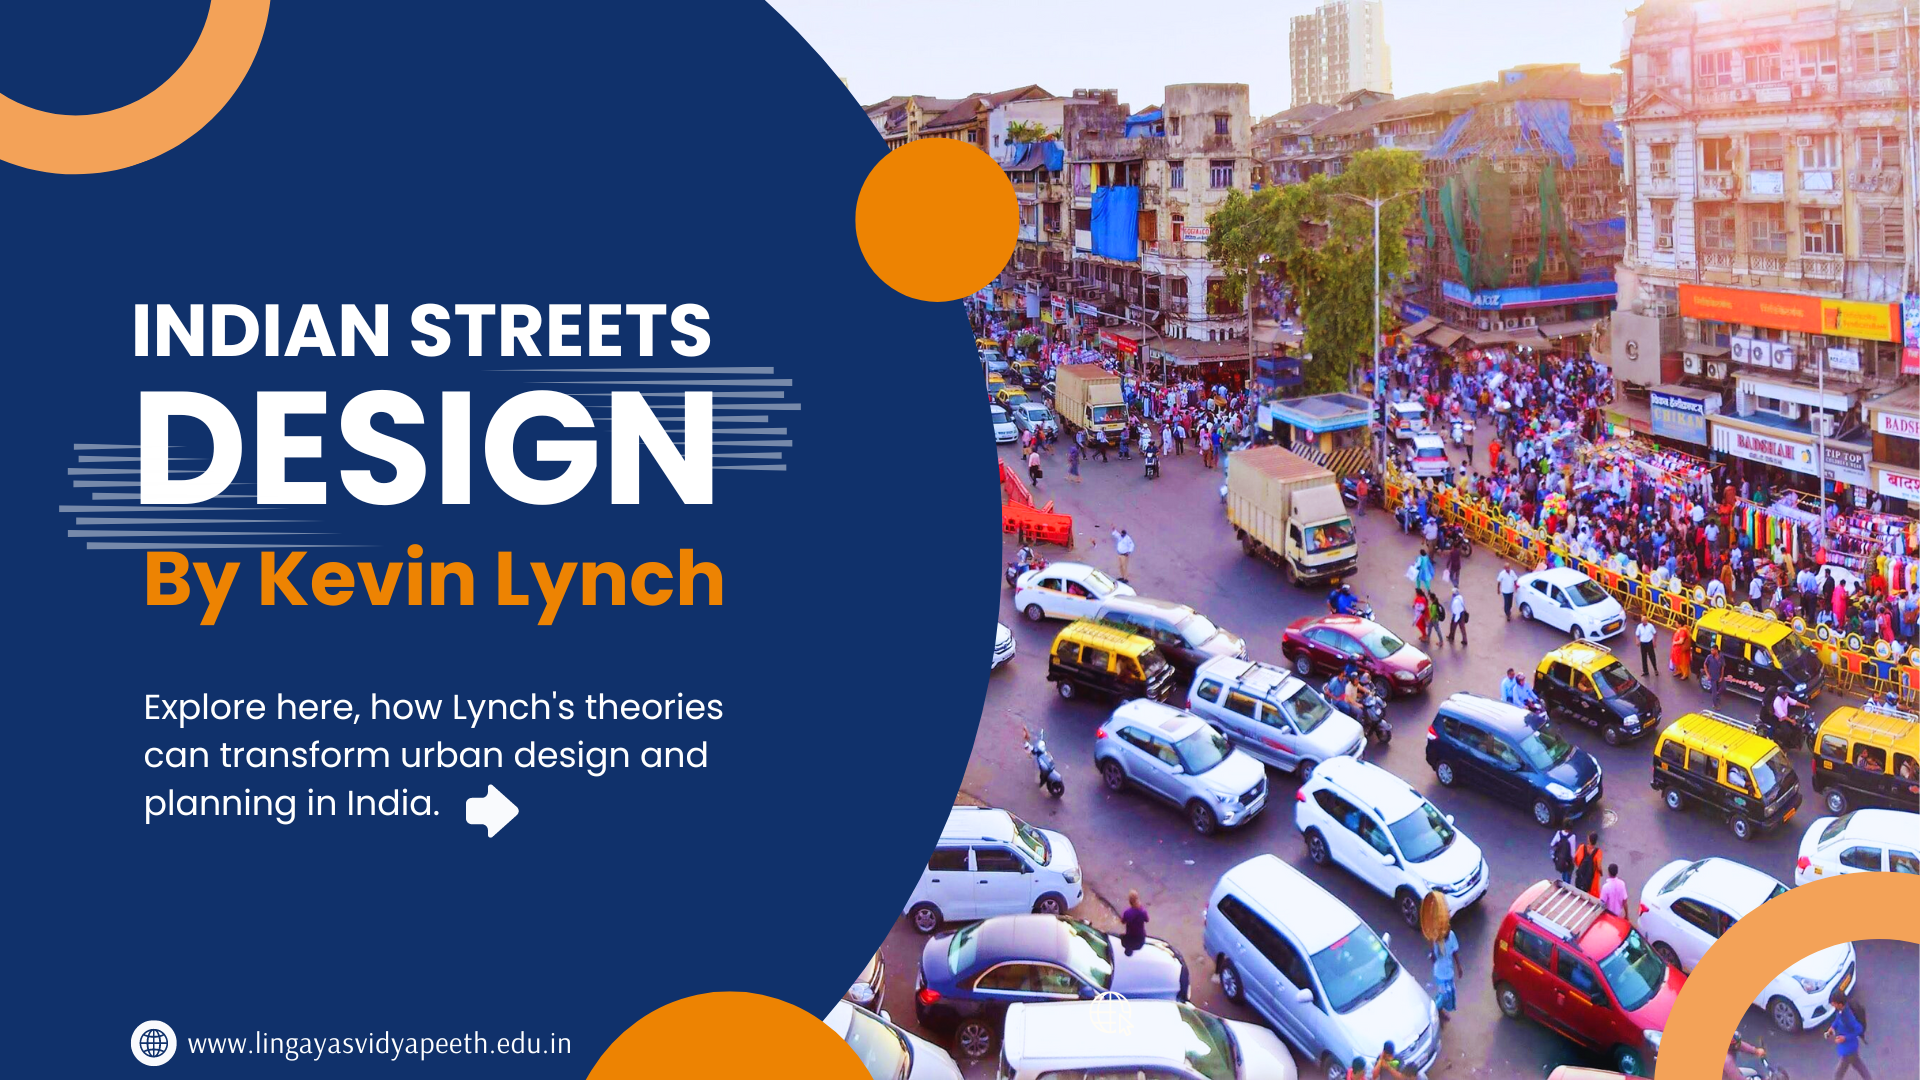 Redefining Indian Streets Through Kevin Lynch’s Lens